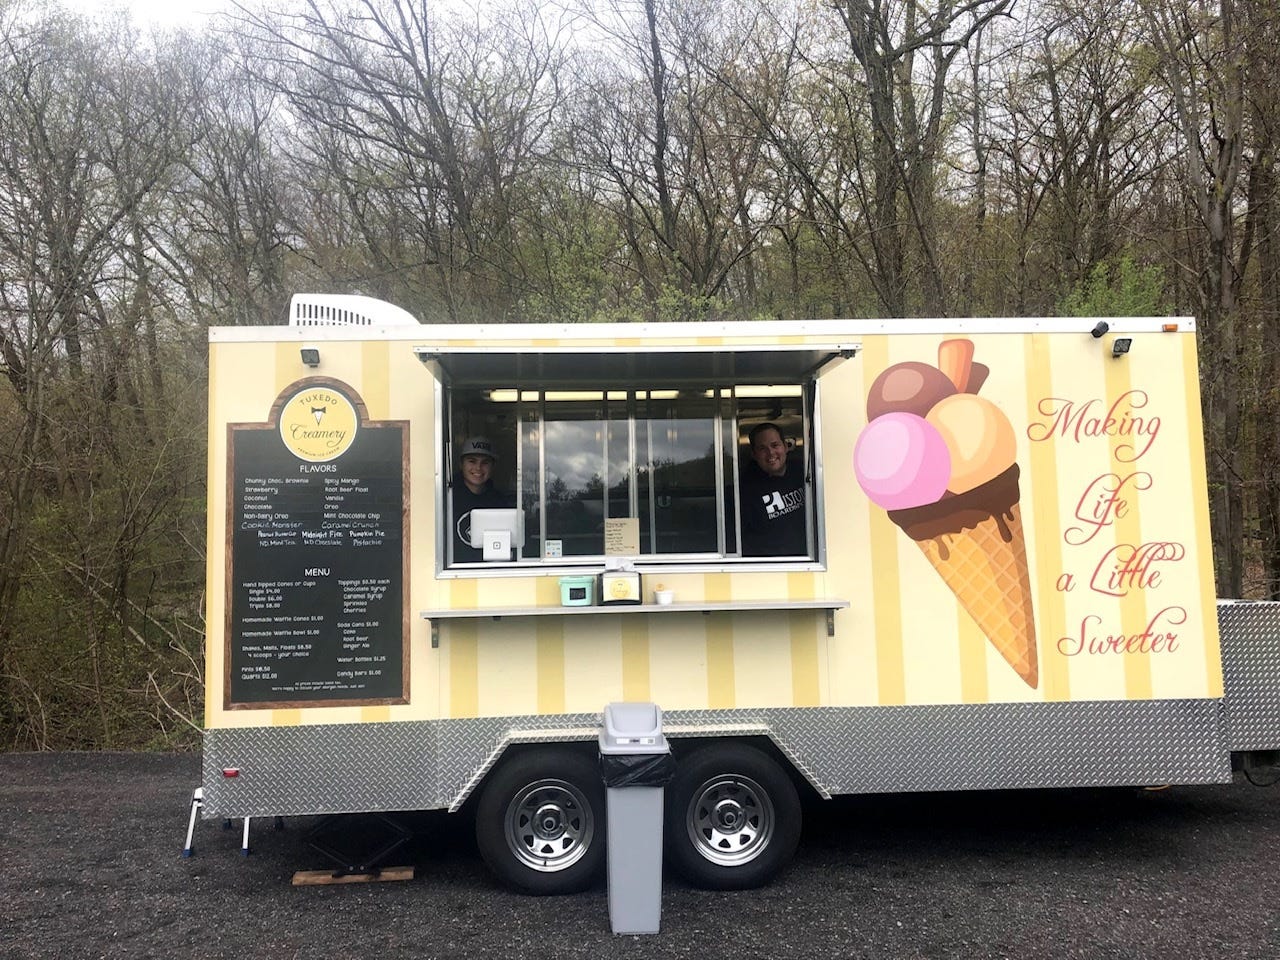 Sundae delight: Family-owned ice cream truck finds fans in Rockland, Orange counties